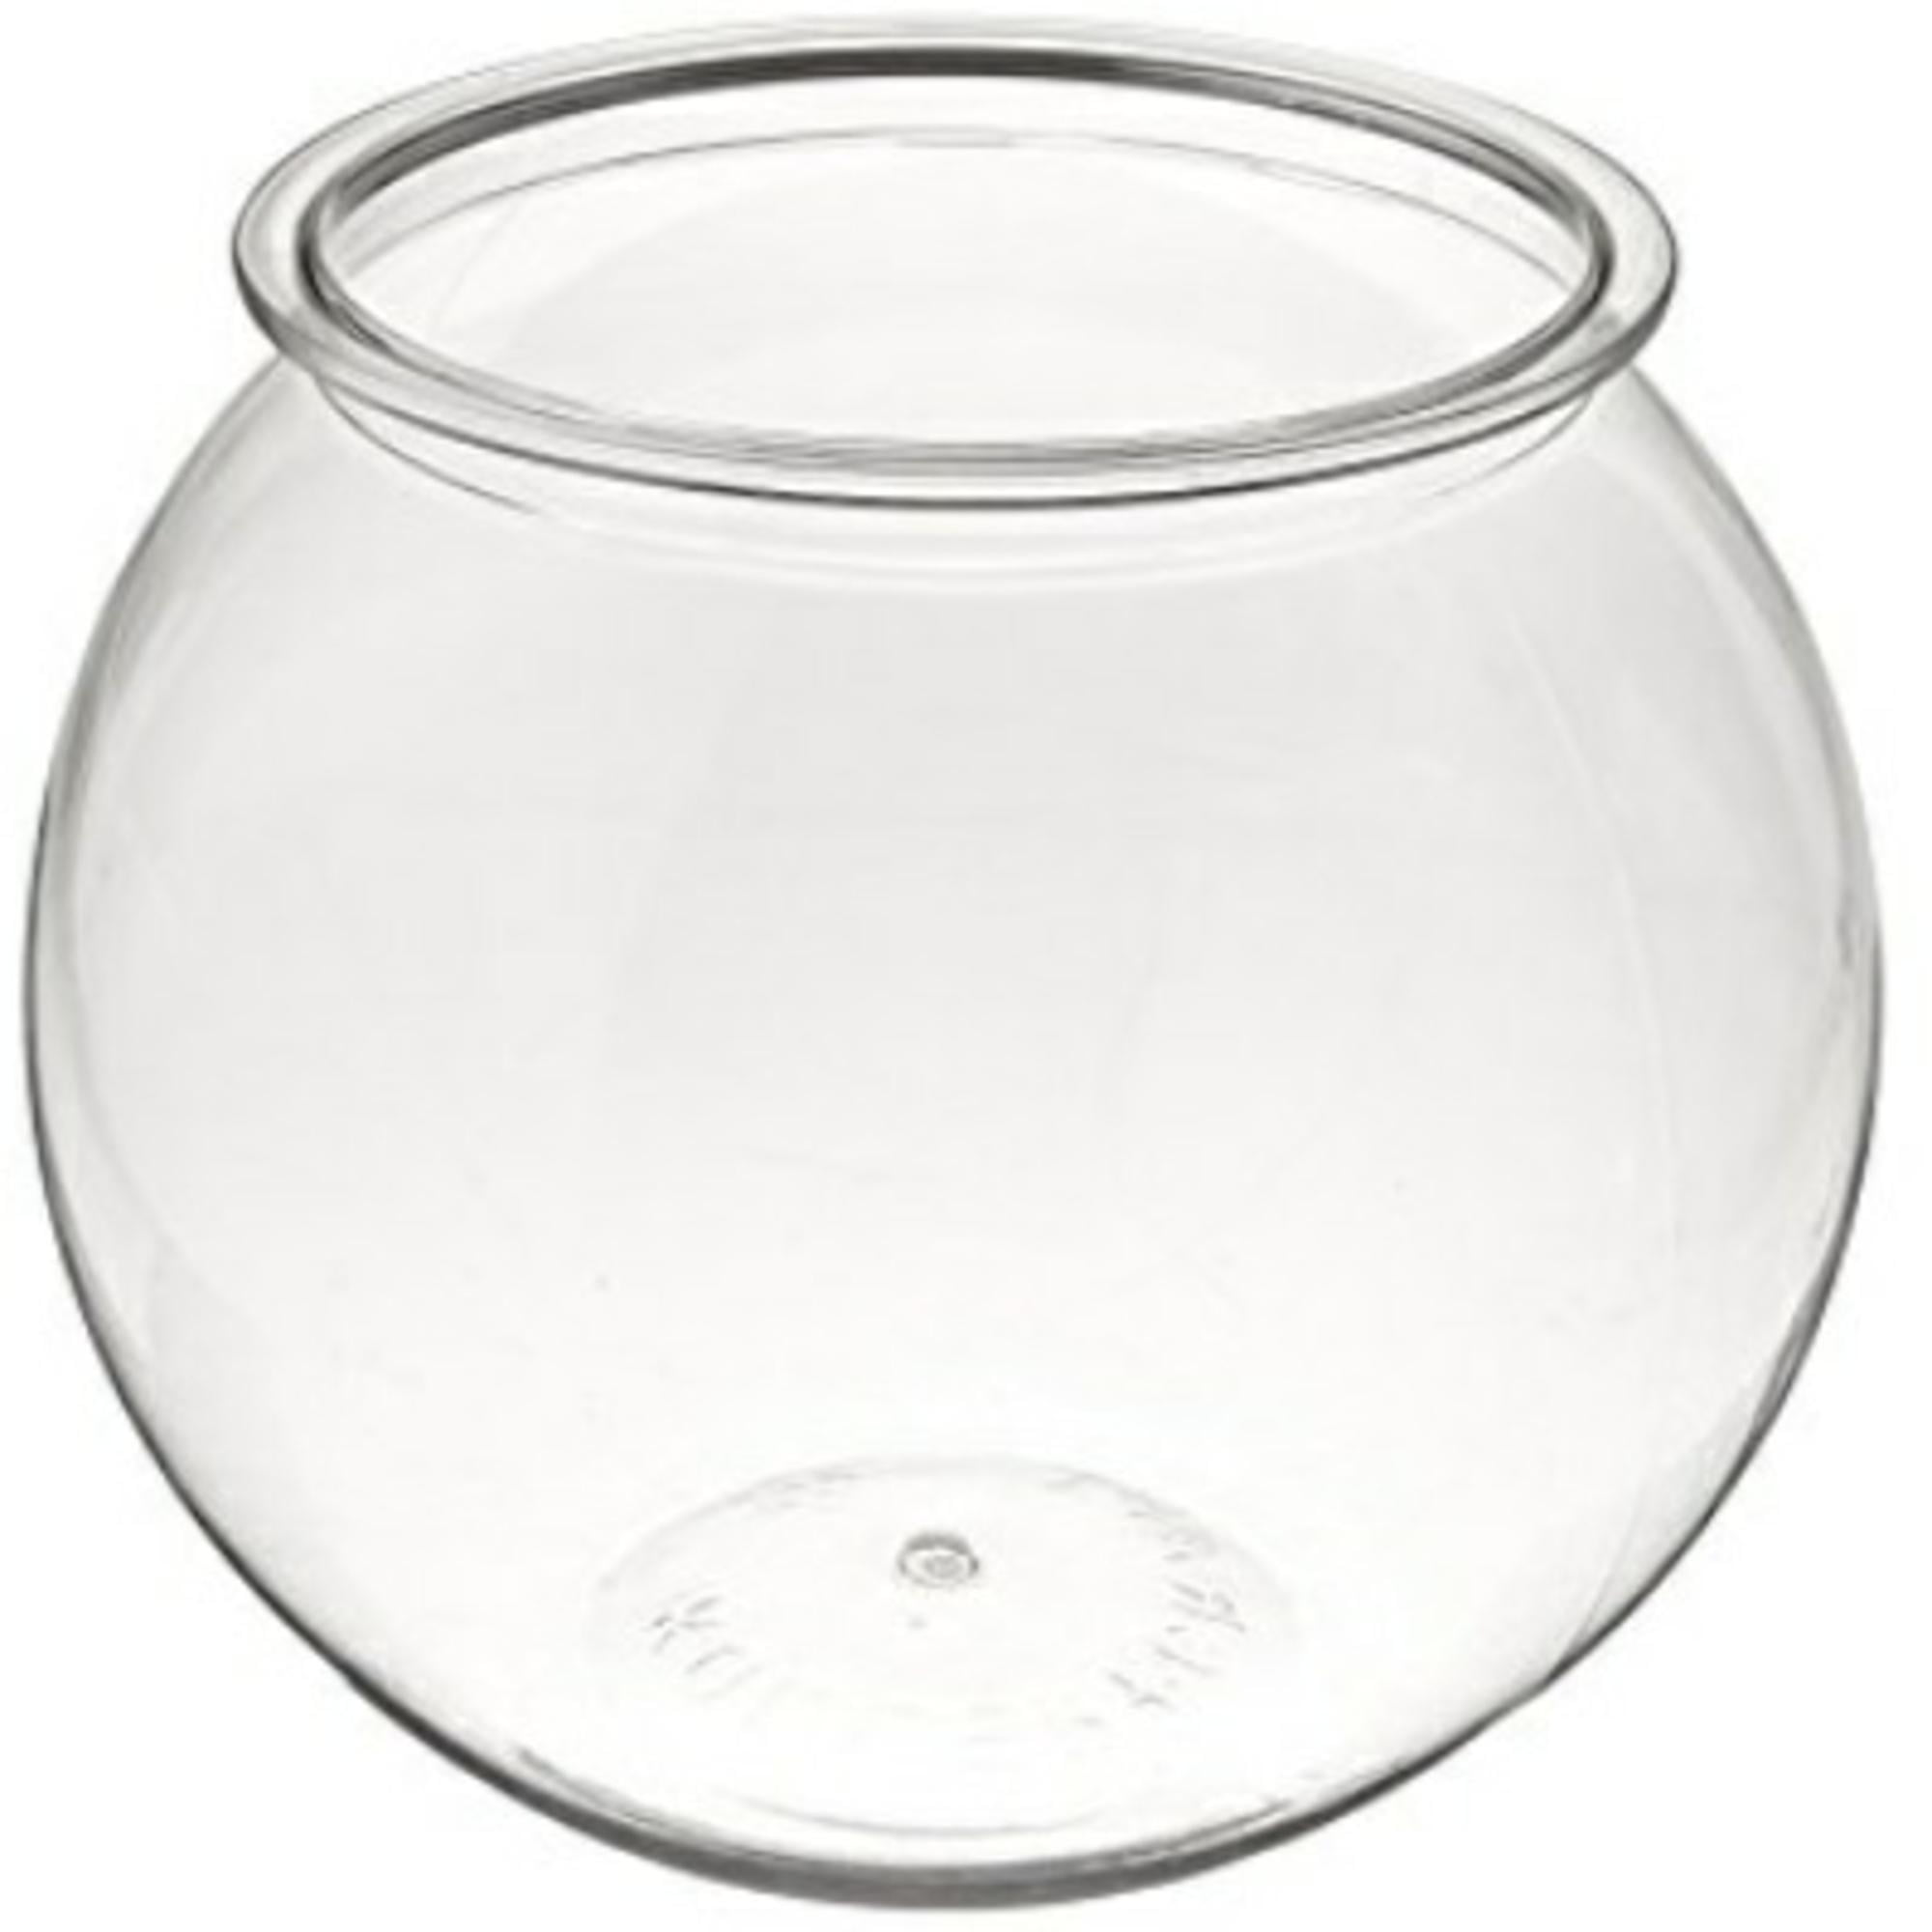 Hawkeye 2-gallon bubble-shaped bowl is perfect for home decor; centerpieces...